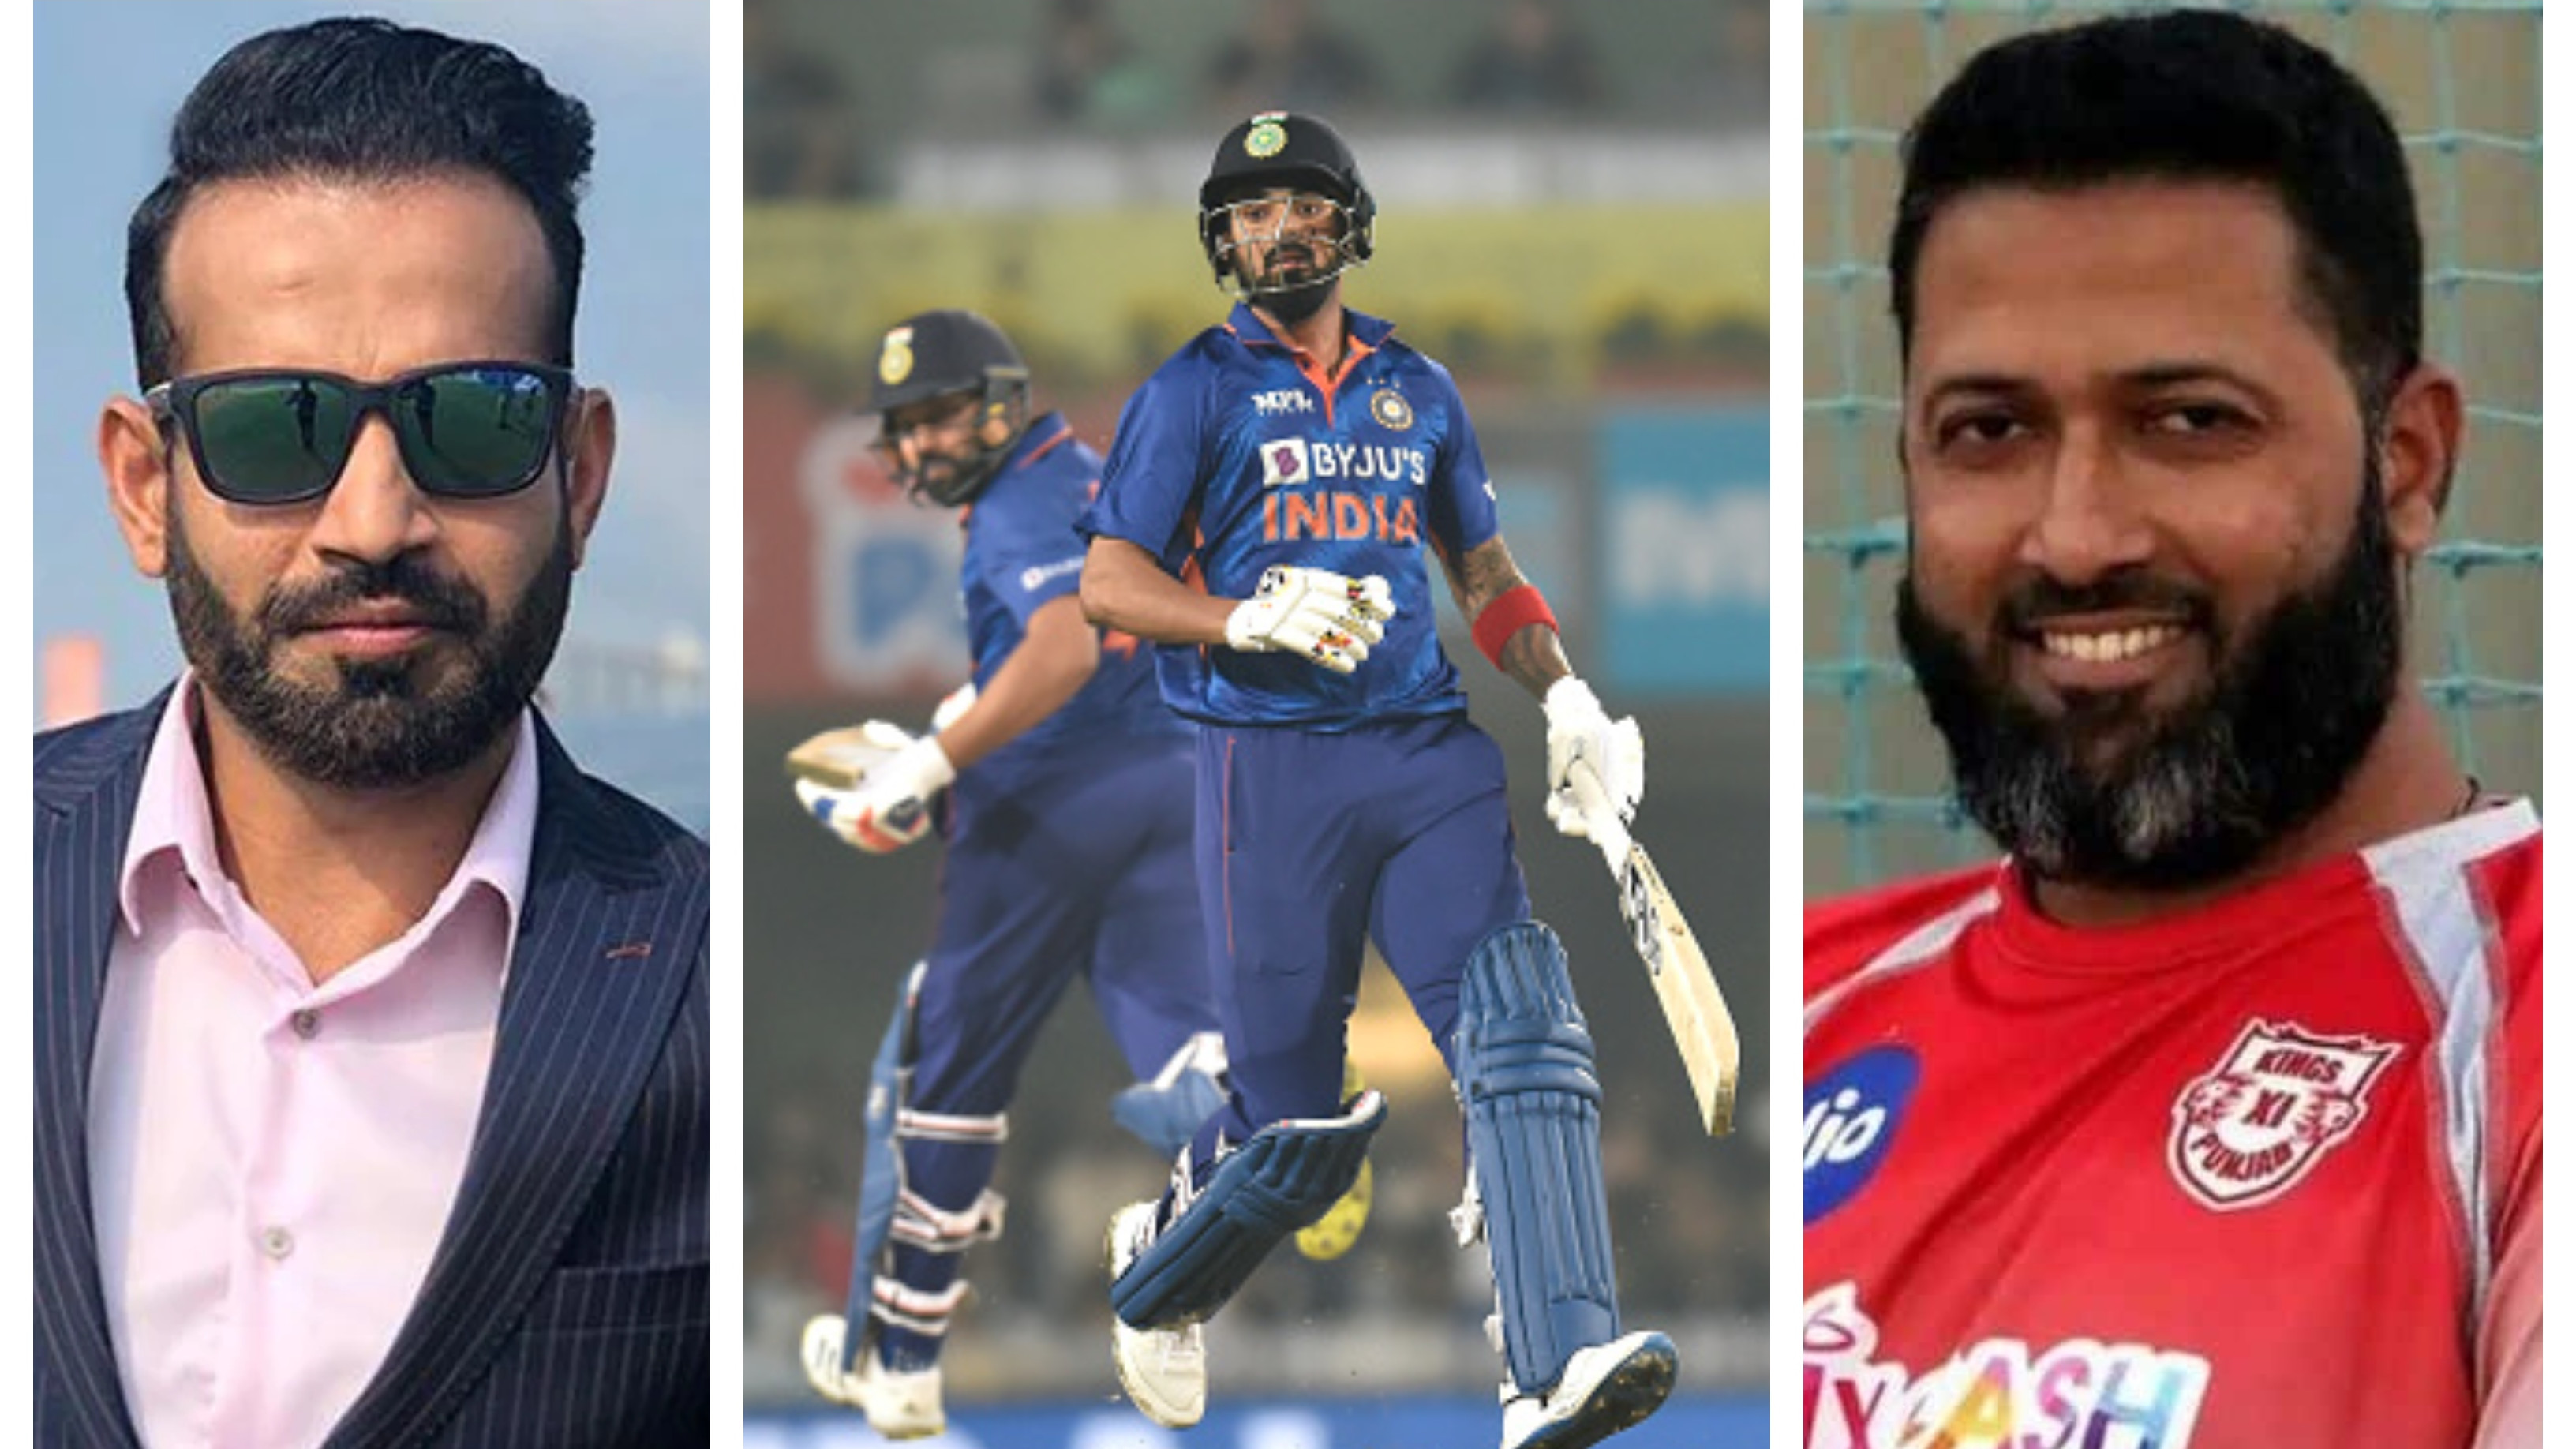 IND v NZ 2021: Cricket fraternity reacts to India’s series-clinching 7-wicket victory in second T20I